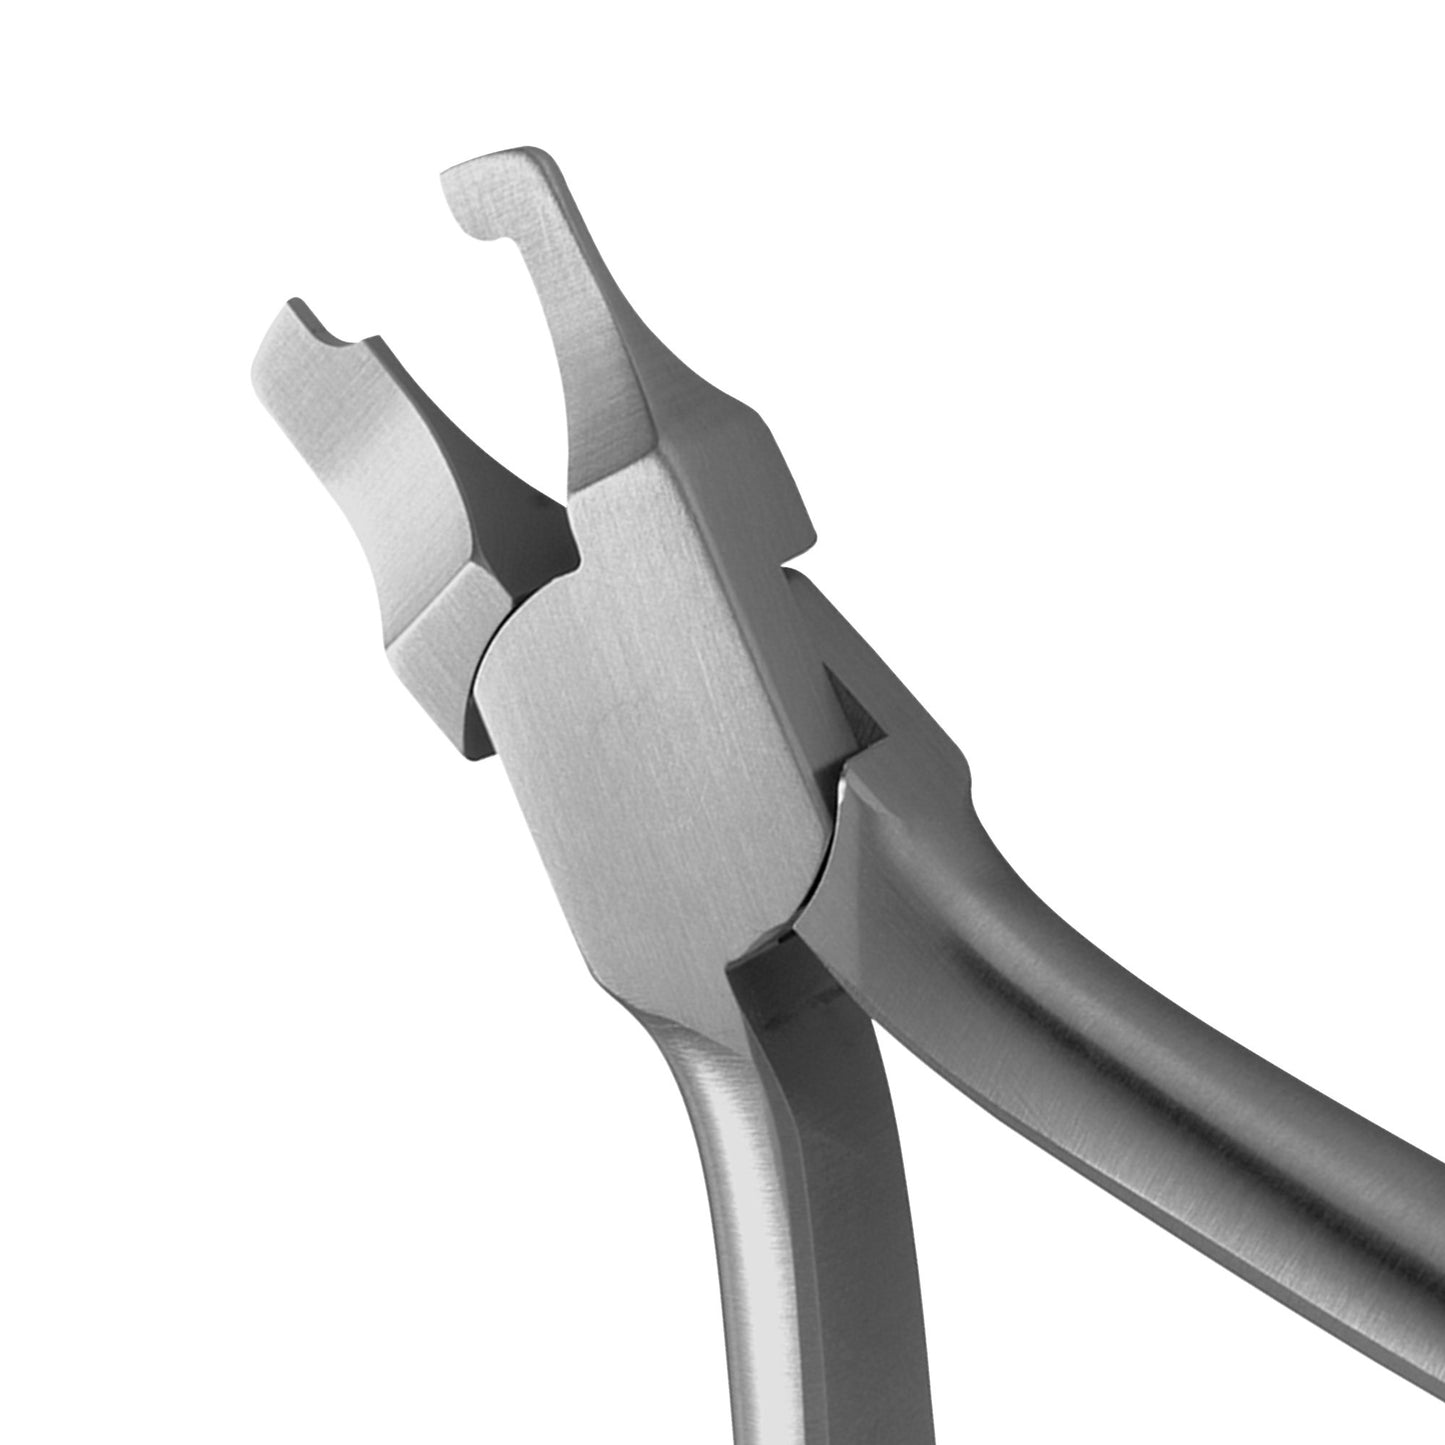 Ortho Pliers Crimpingband Fitter